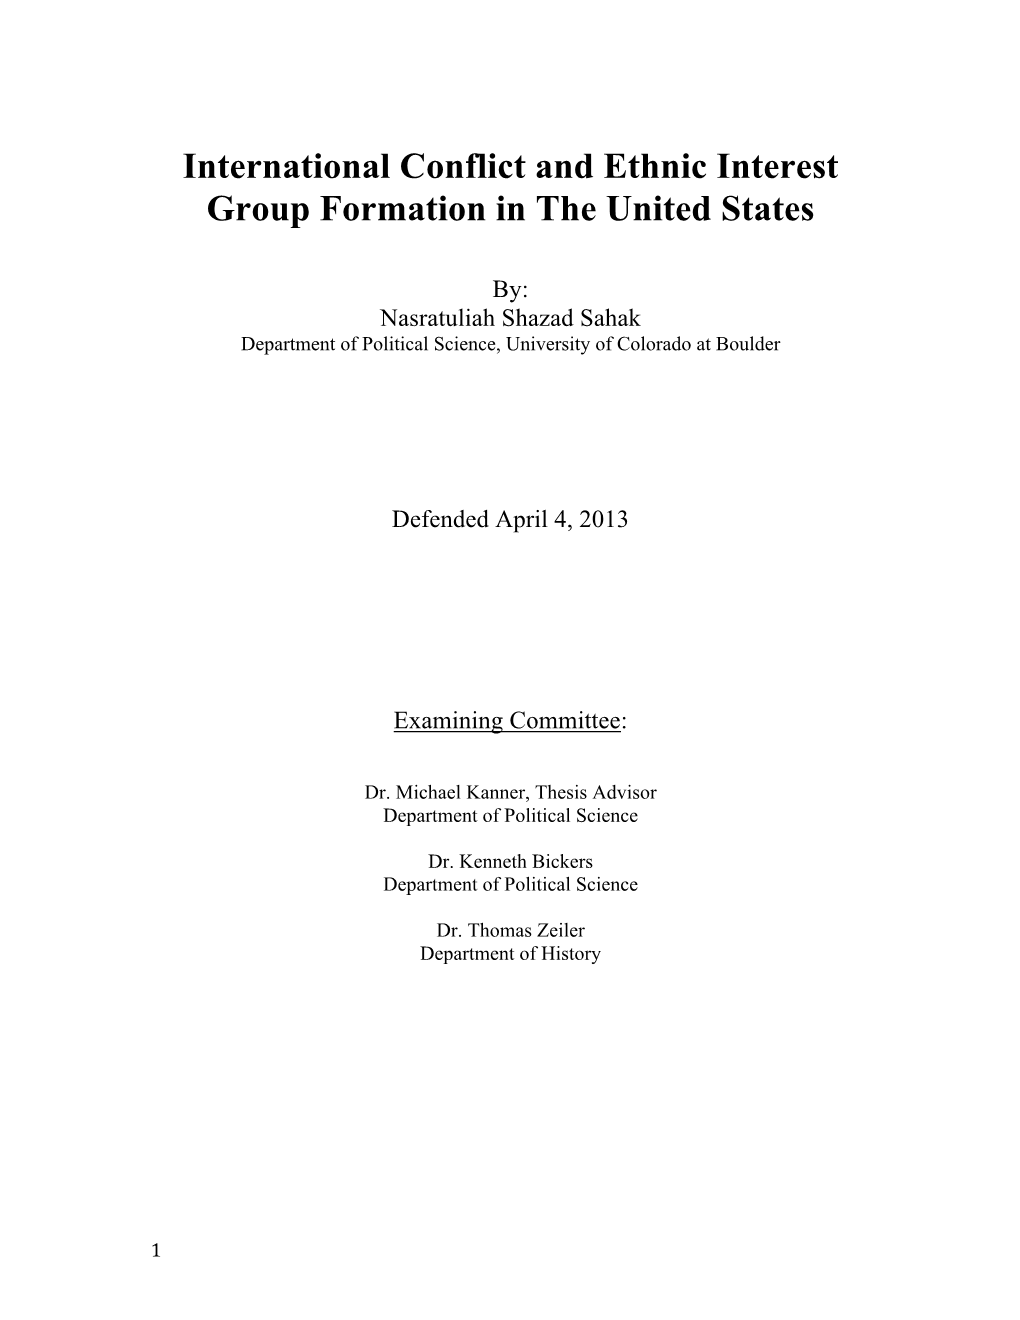 International Conflict and Ethnic Interest Group Formation in the United States